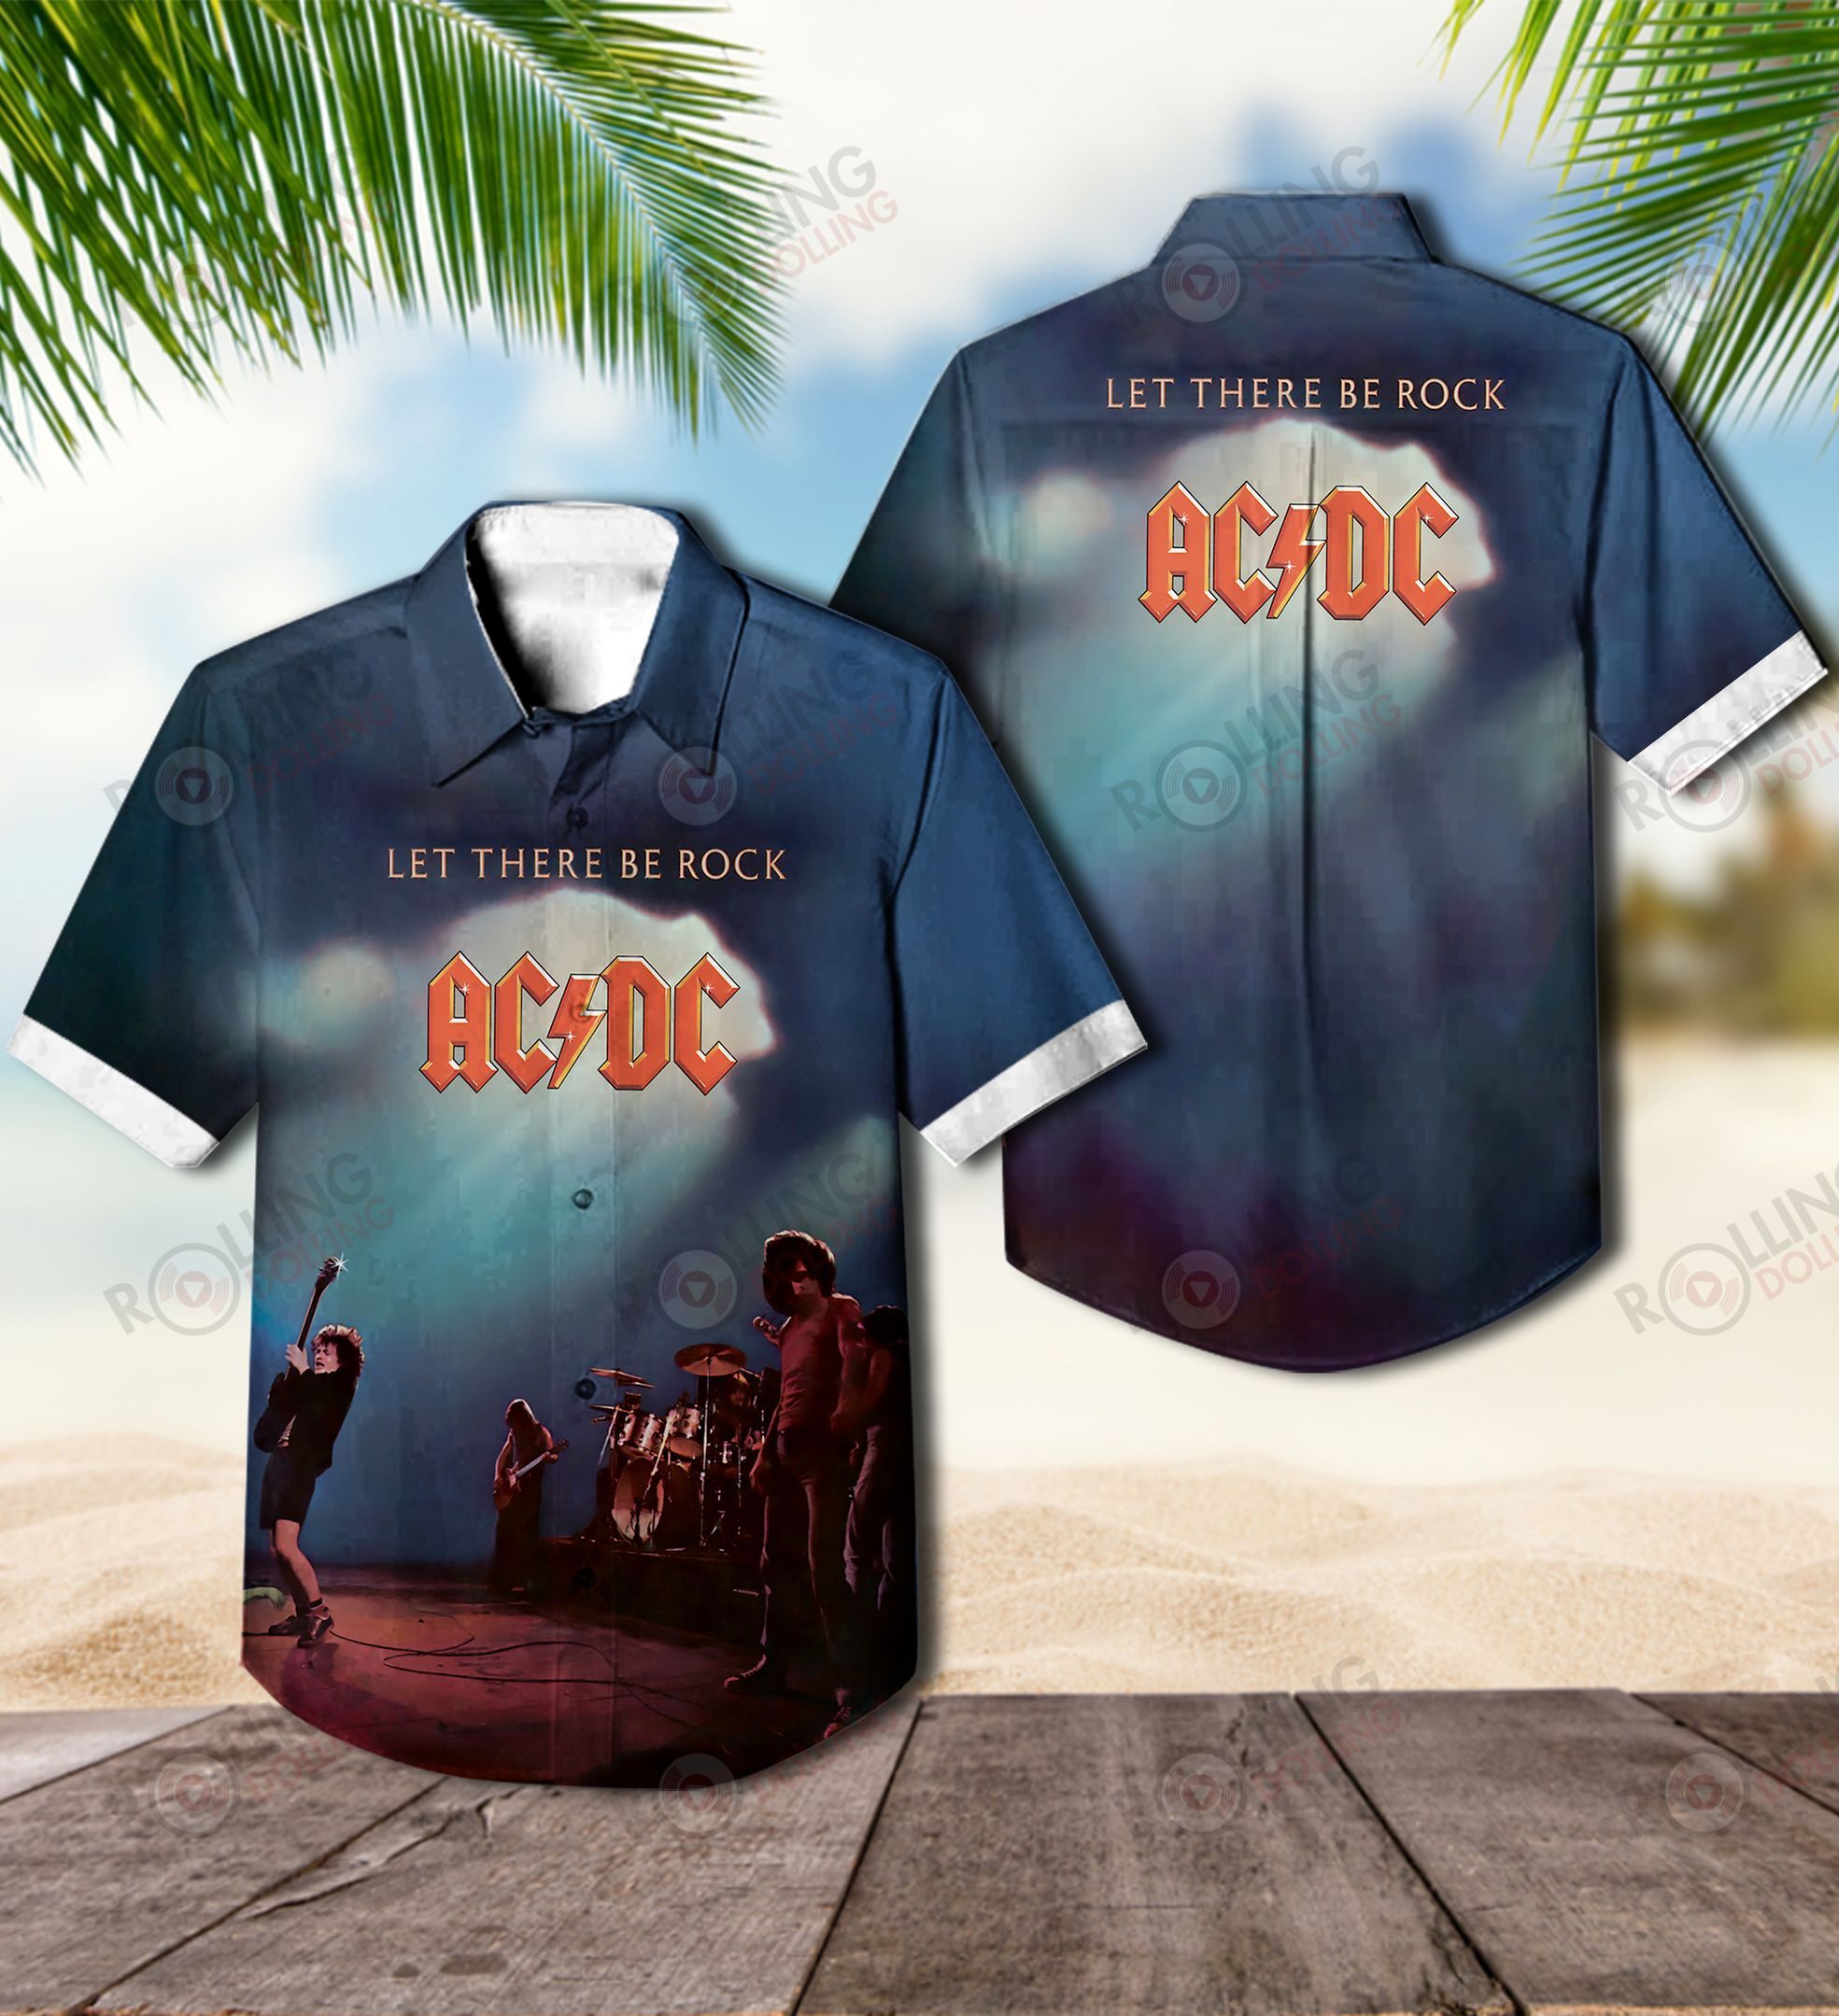 This would make a great gift for any fan who loves Hawaiian Shirt as well as Rock band 11